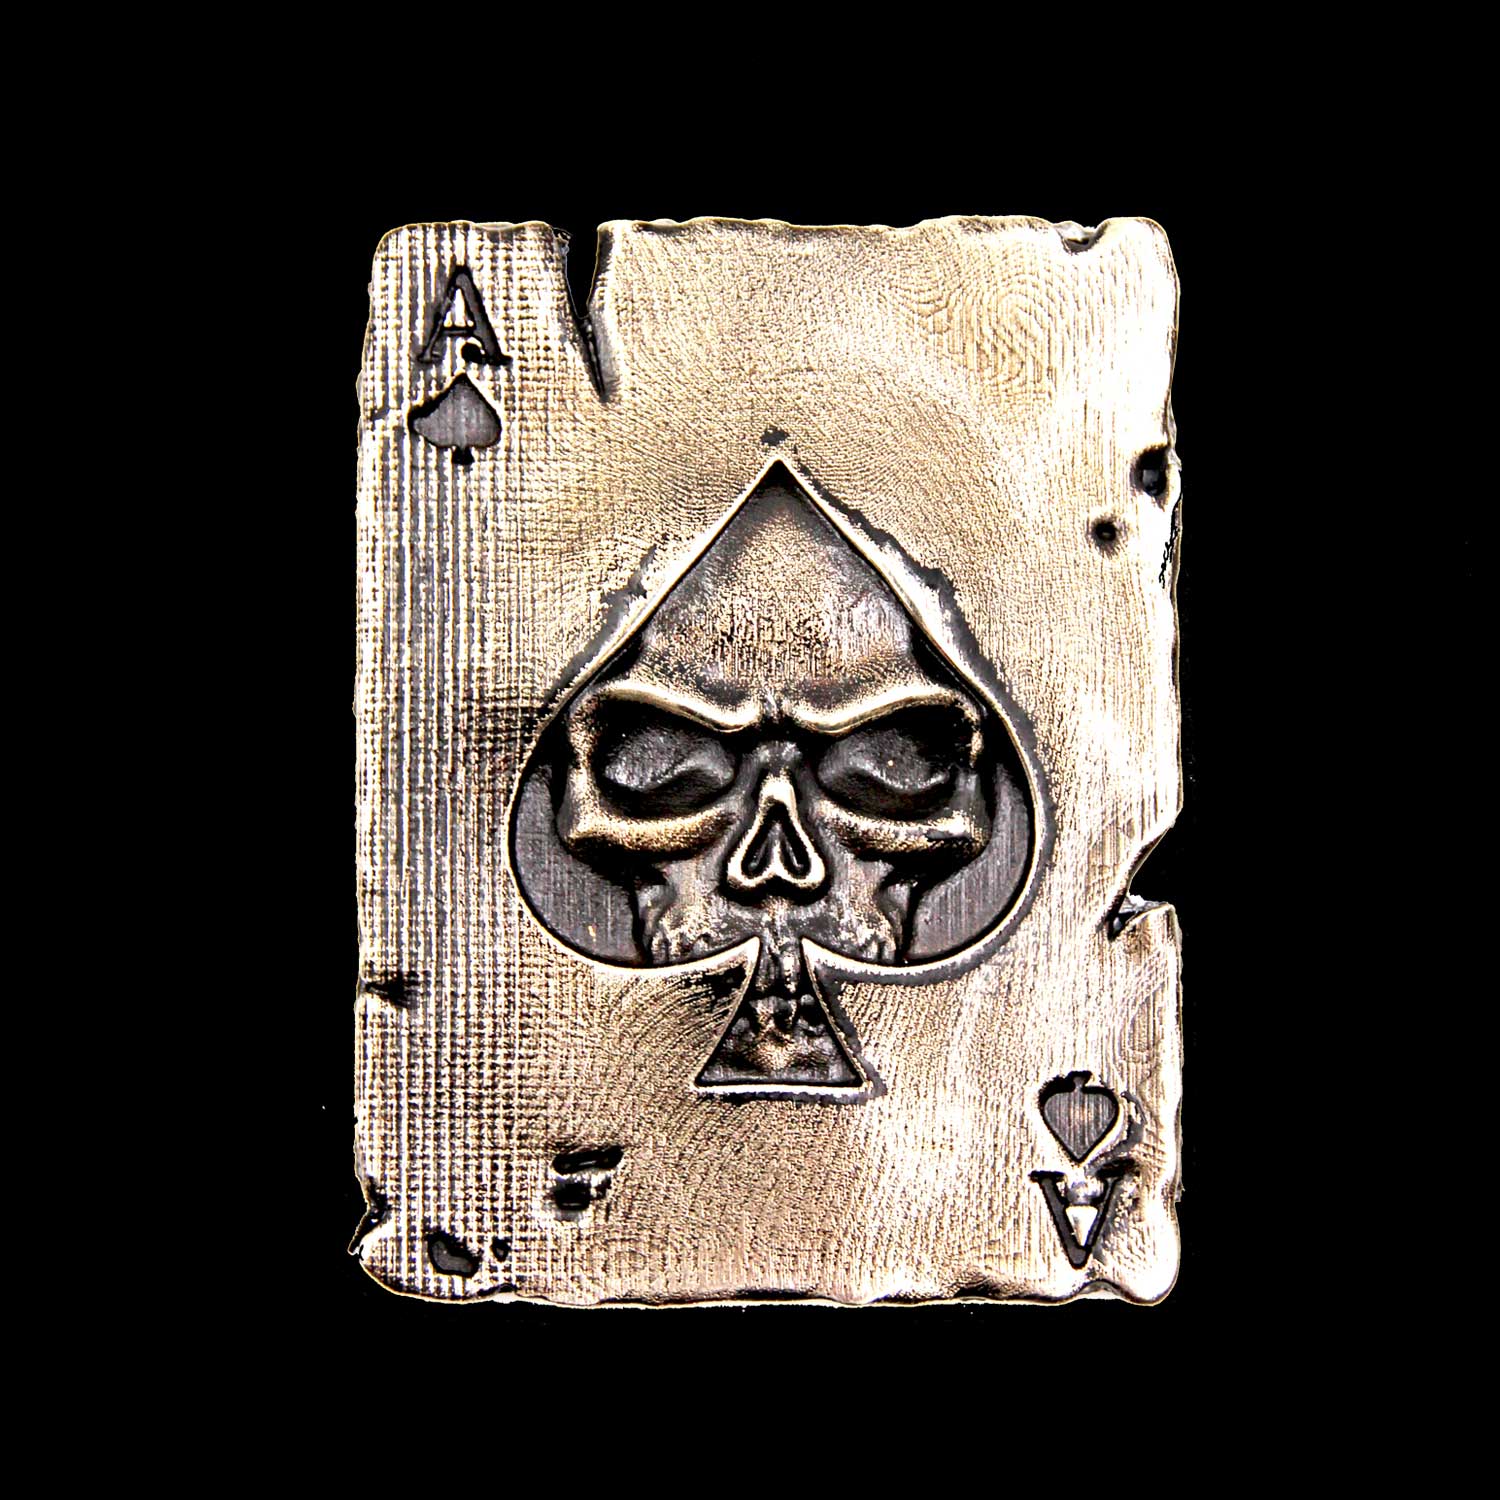 Vest Patches - You Get Two - Ace of Spades - Skull Flame Design